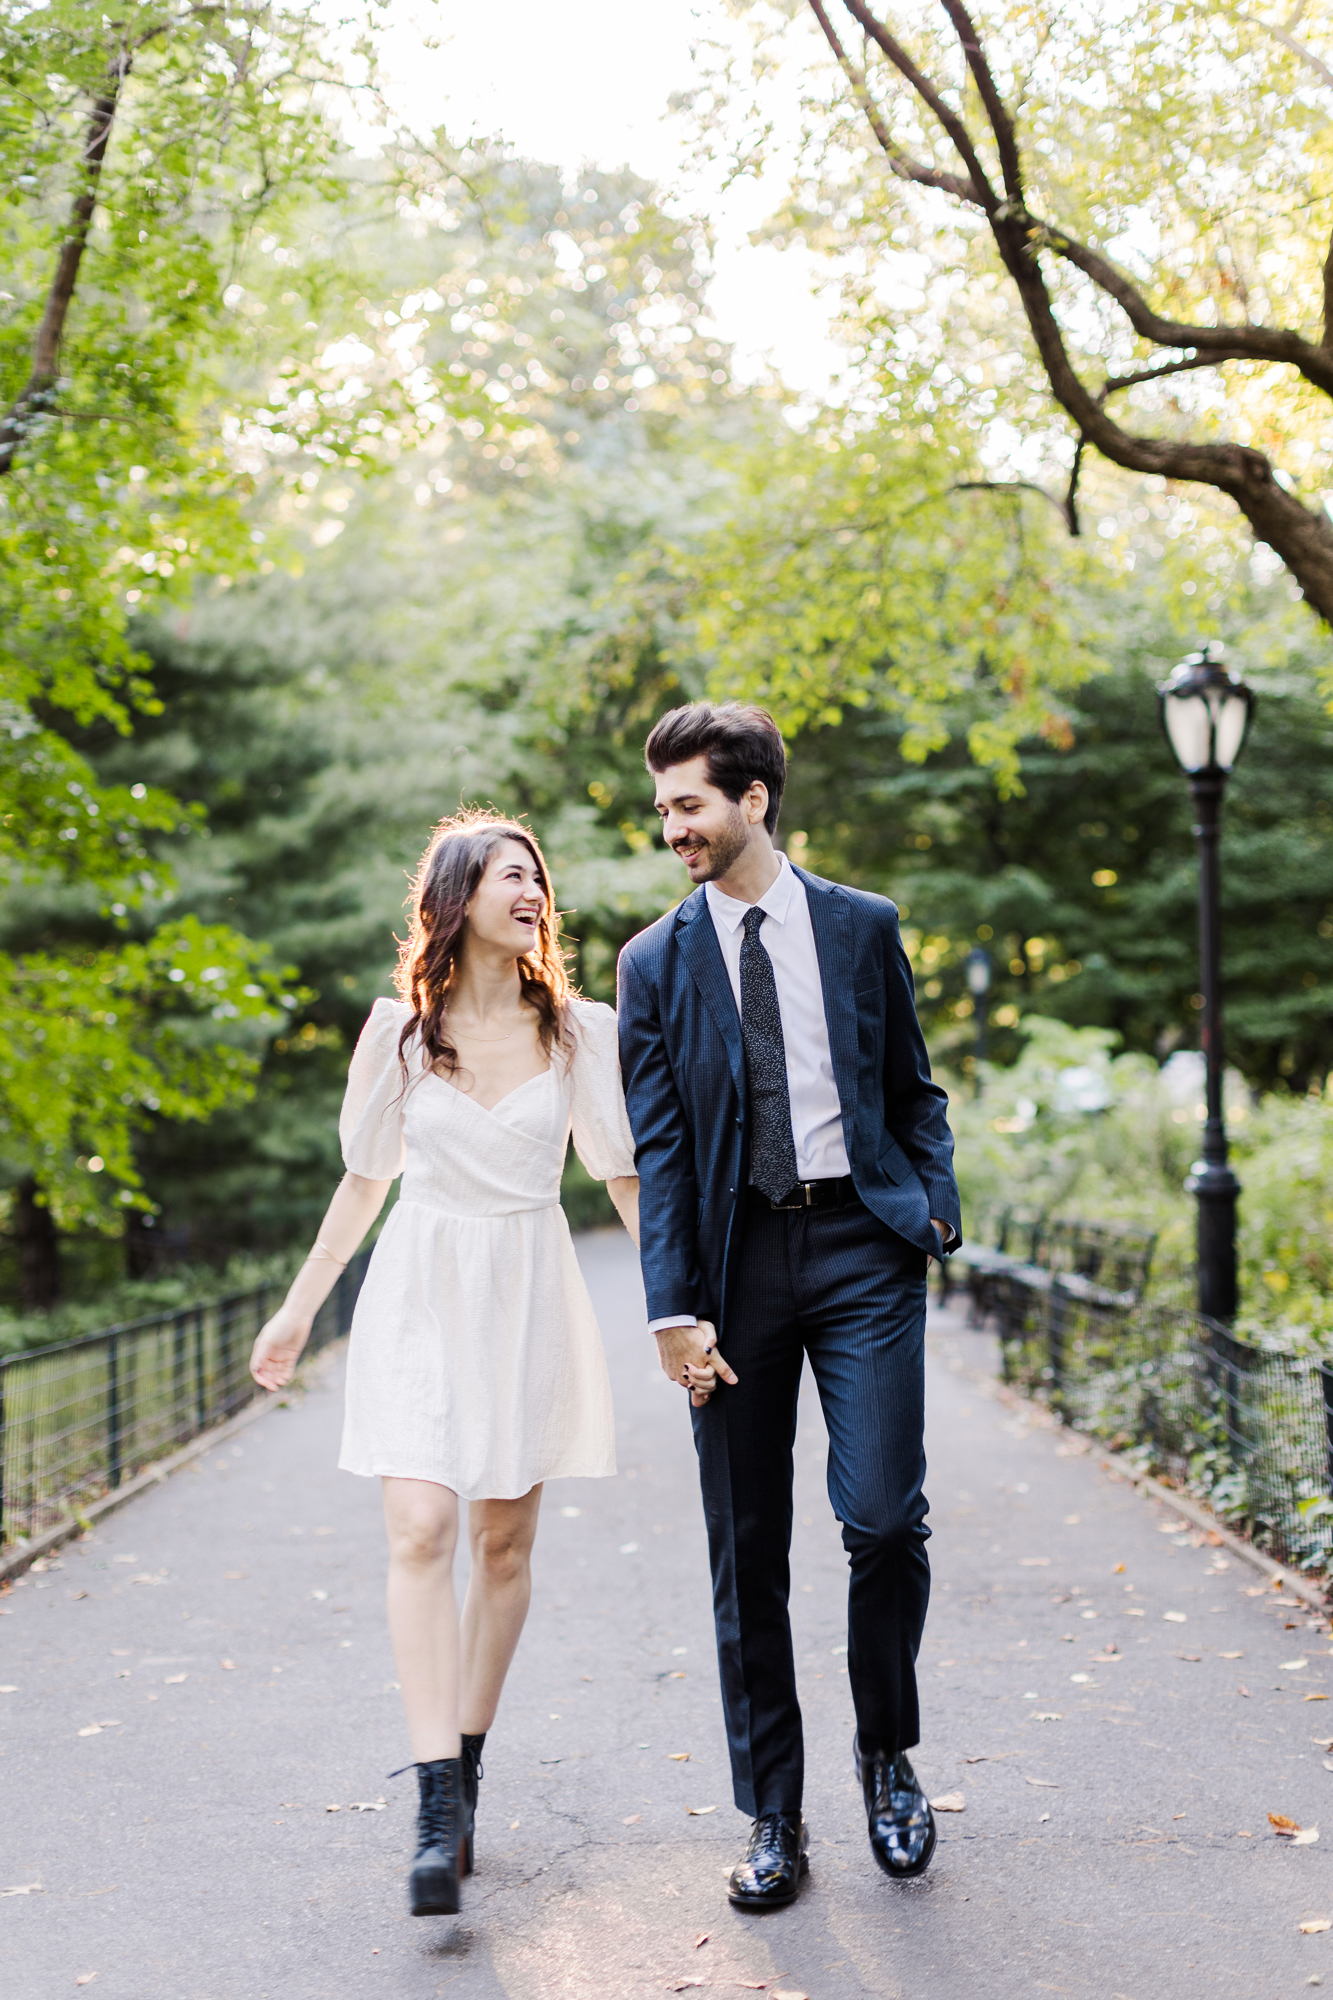 Special Central Park Engagement Photos in NYC